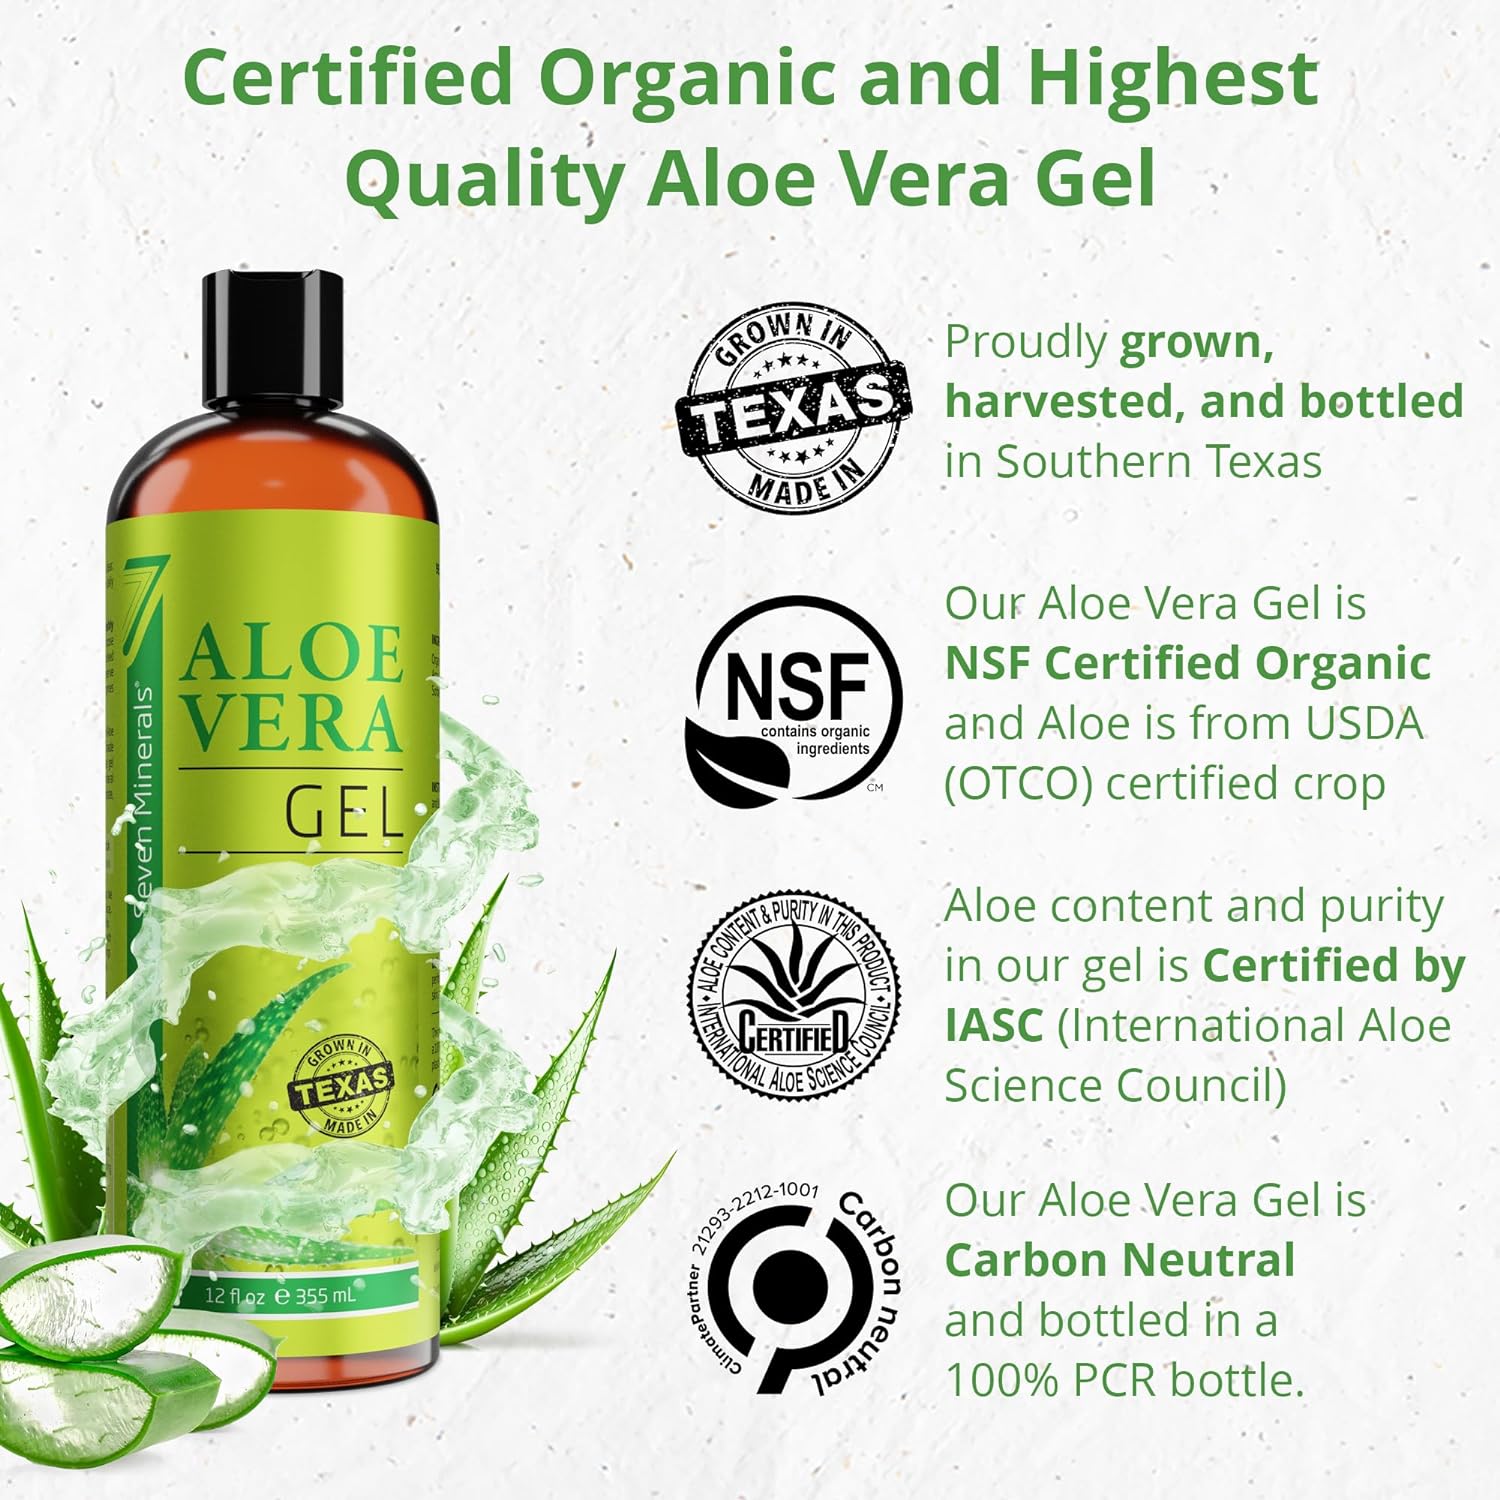 Seven Minerals Organic Aloe Vera Gel with 100% Pure Aloe From Freshly Cut Aloe Plant, Not Powder - No Xanthan, So It Absorbs Rapidly with No Sticky Residue - Big 12 fl oz - image 4 of 5